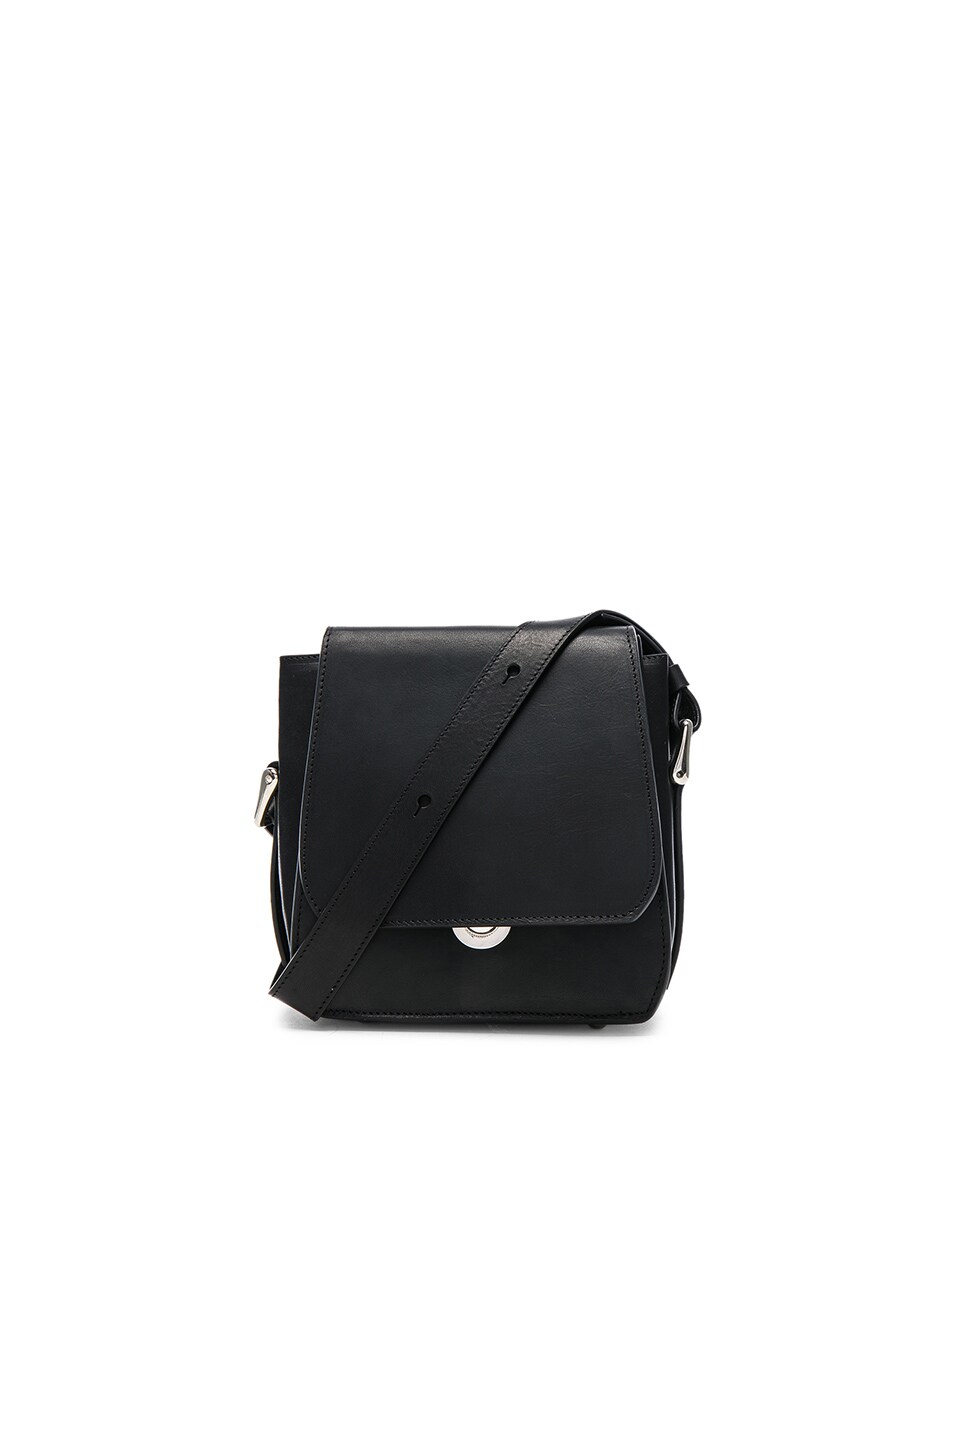 Image 1 of Ann Demeulemeester Leather Bag in Black